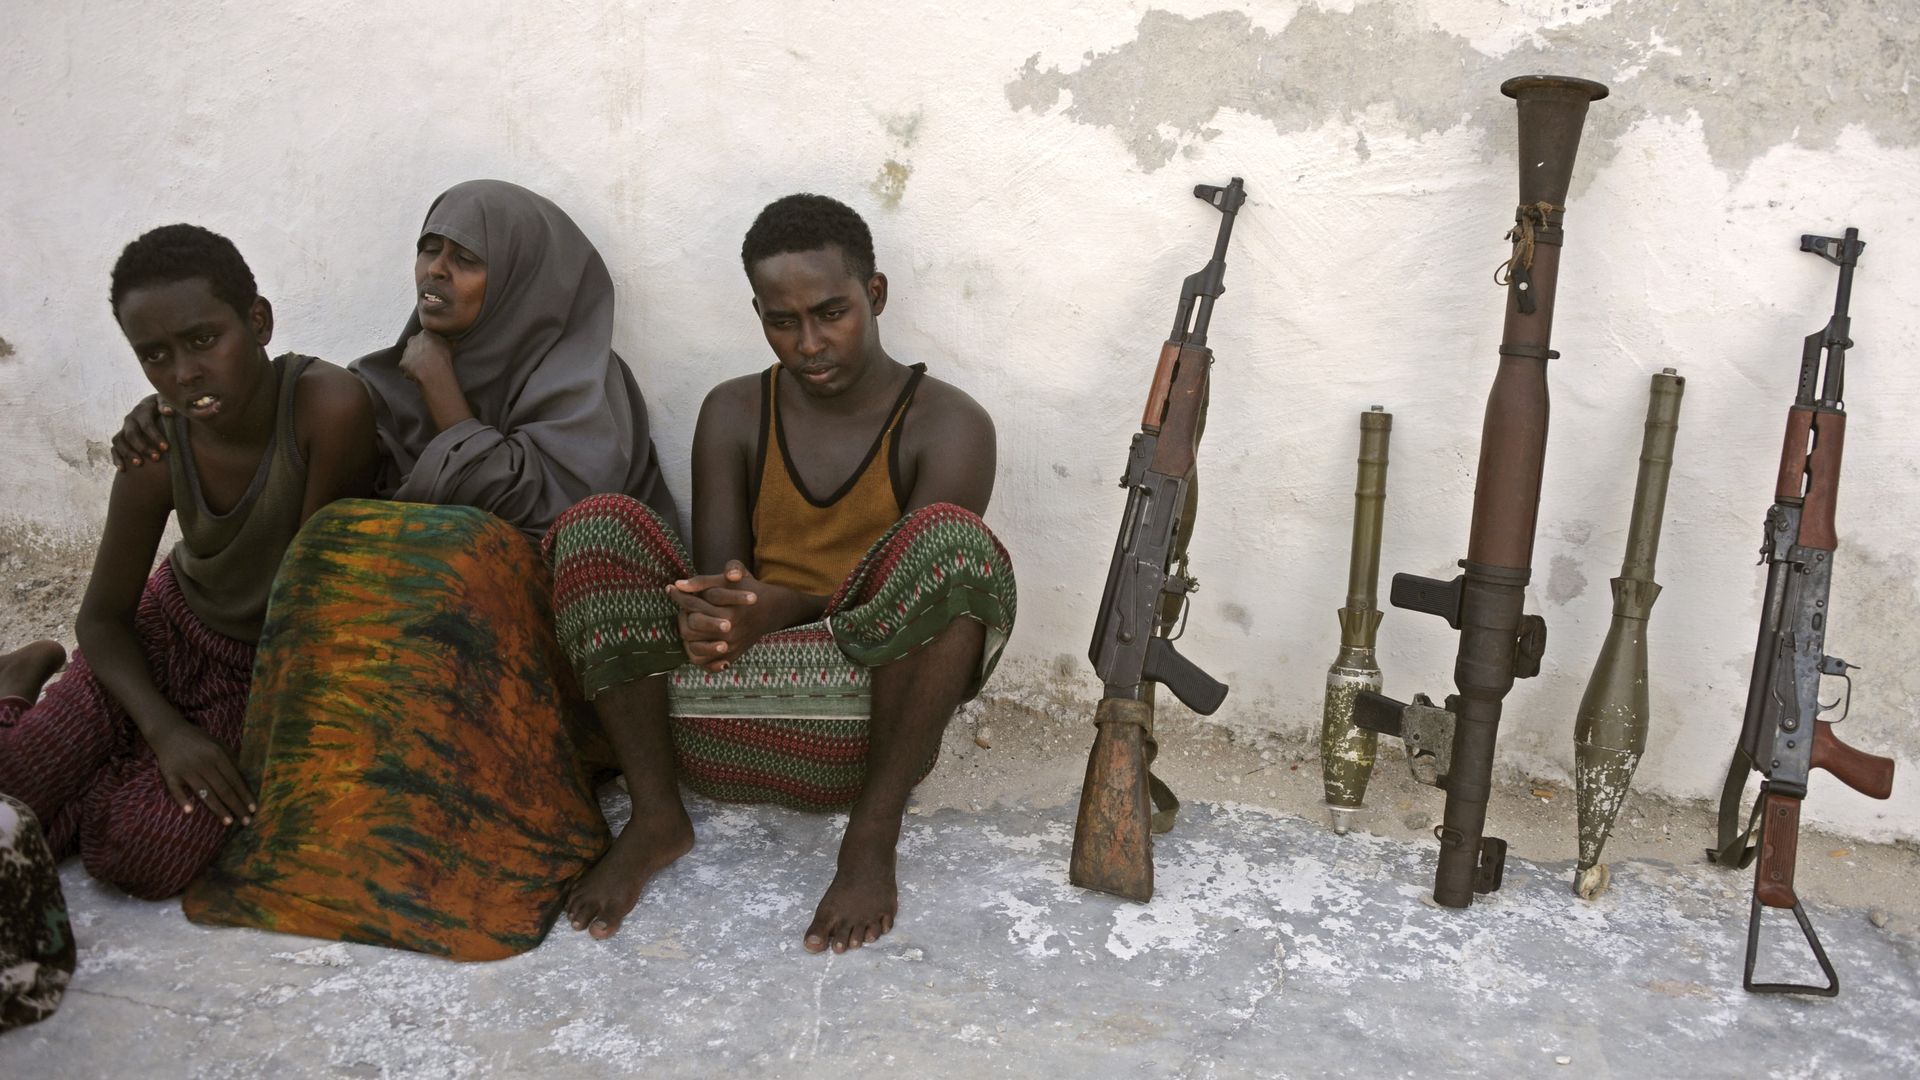 Suspected Al Qaeda-aligned Shabaab militants, a woman and her three children, sit next to weapons after their arrest on May 5, 2016 in Mogadishu